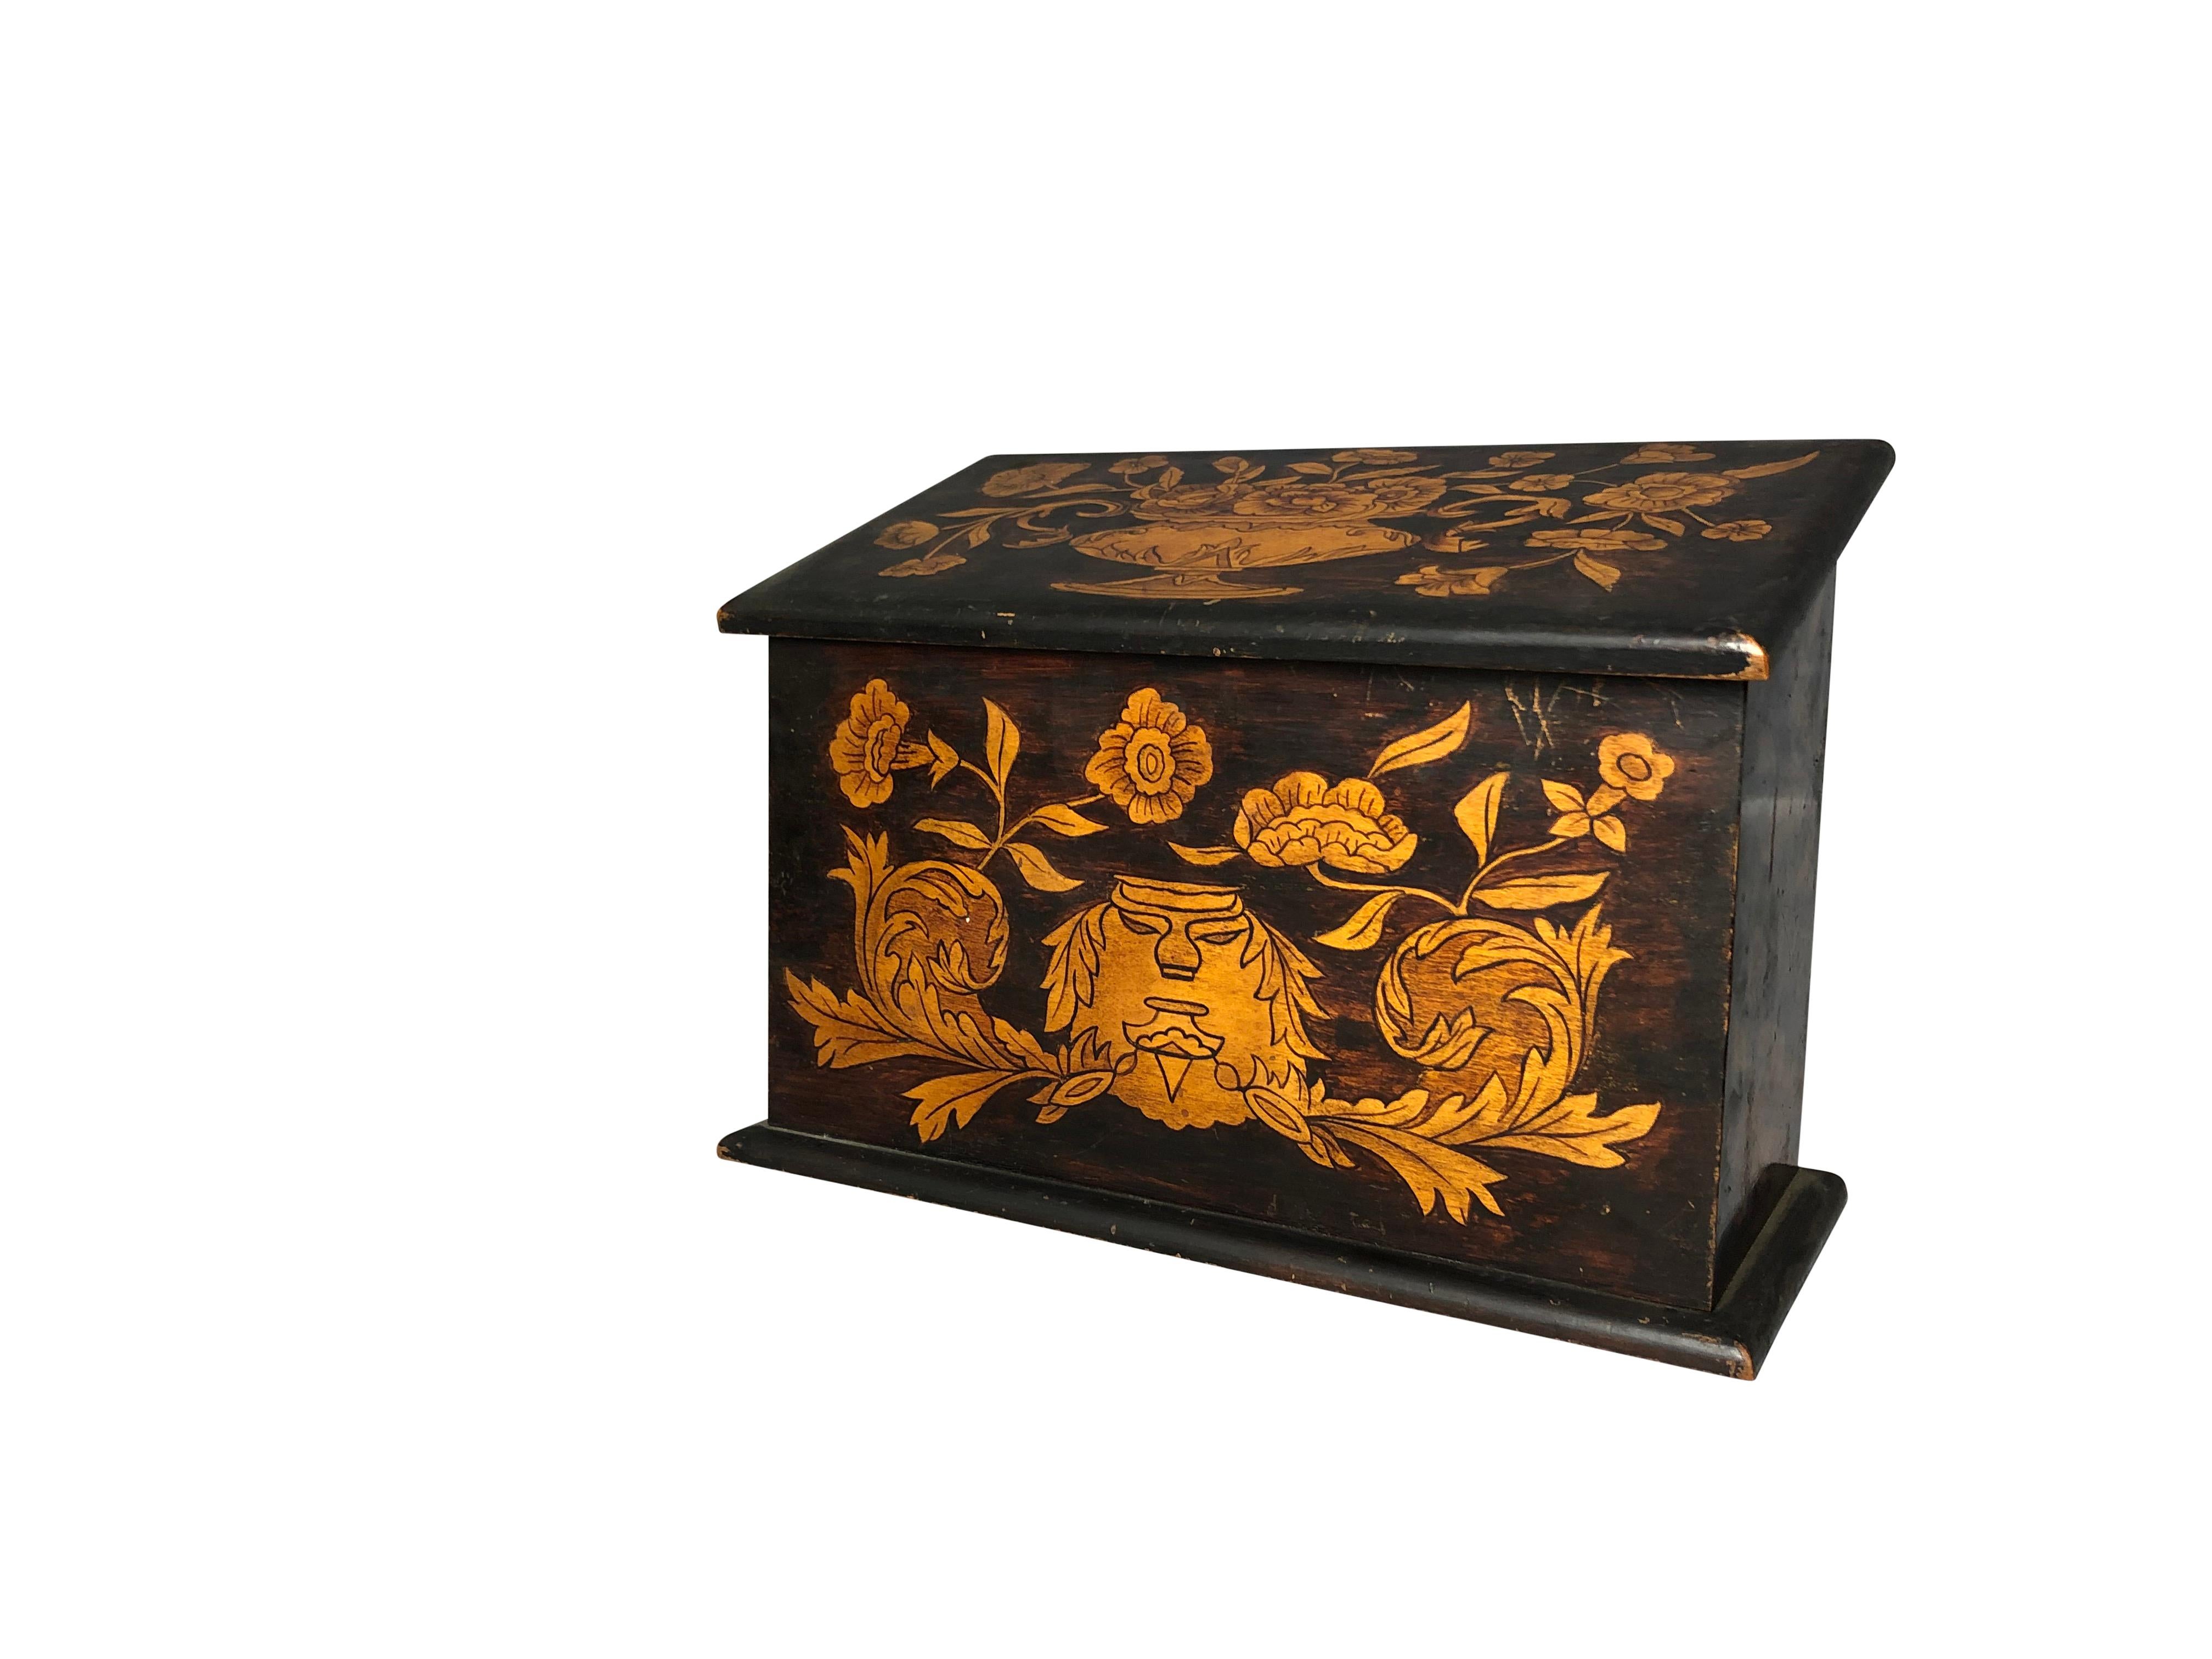 A beautifully hand carved 19th century English oak inlaid letter box. Excellent addition for any home, with stunning floral detail and design. The box depicts scenes of birds, butterflies and floral inlay. A truly wonderful piece, and ready for home